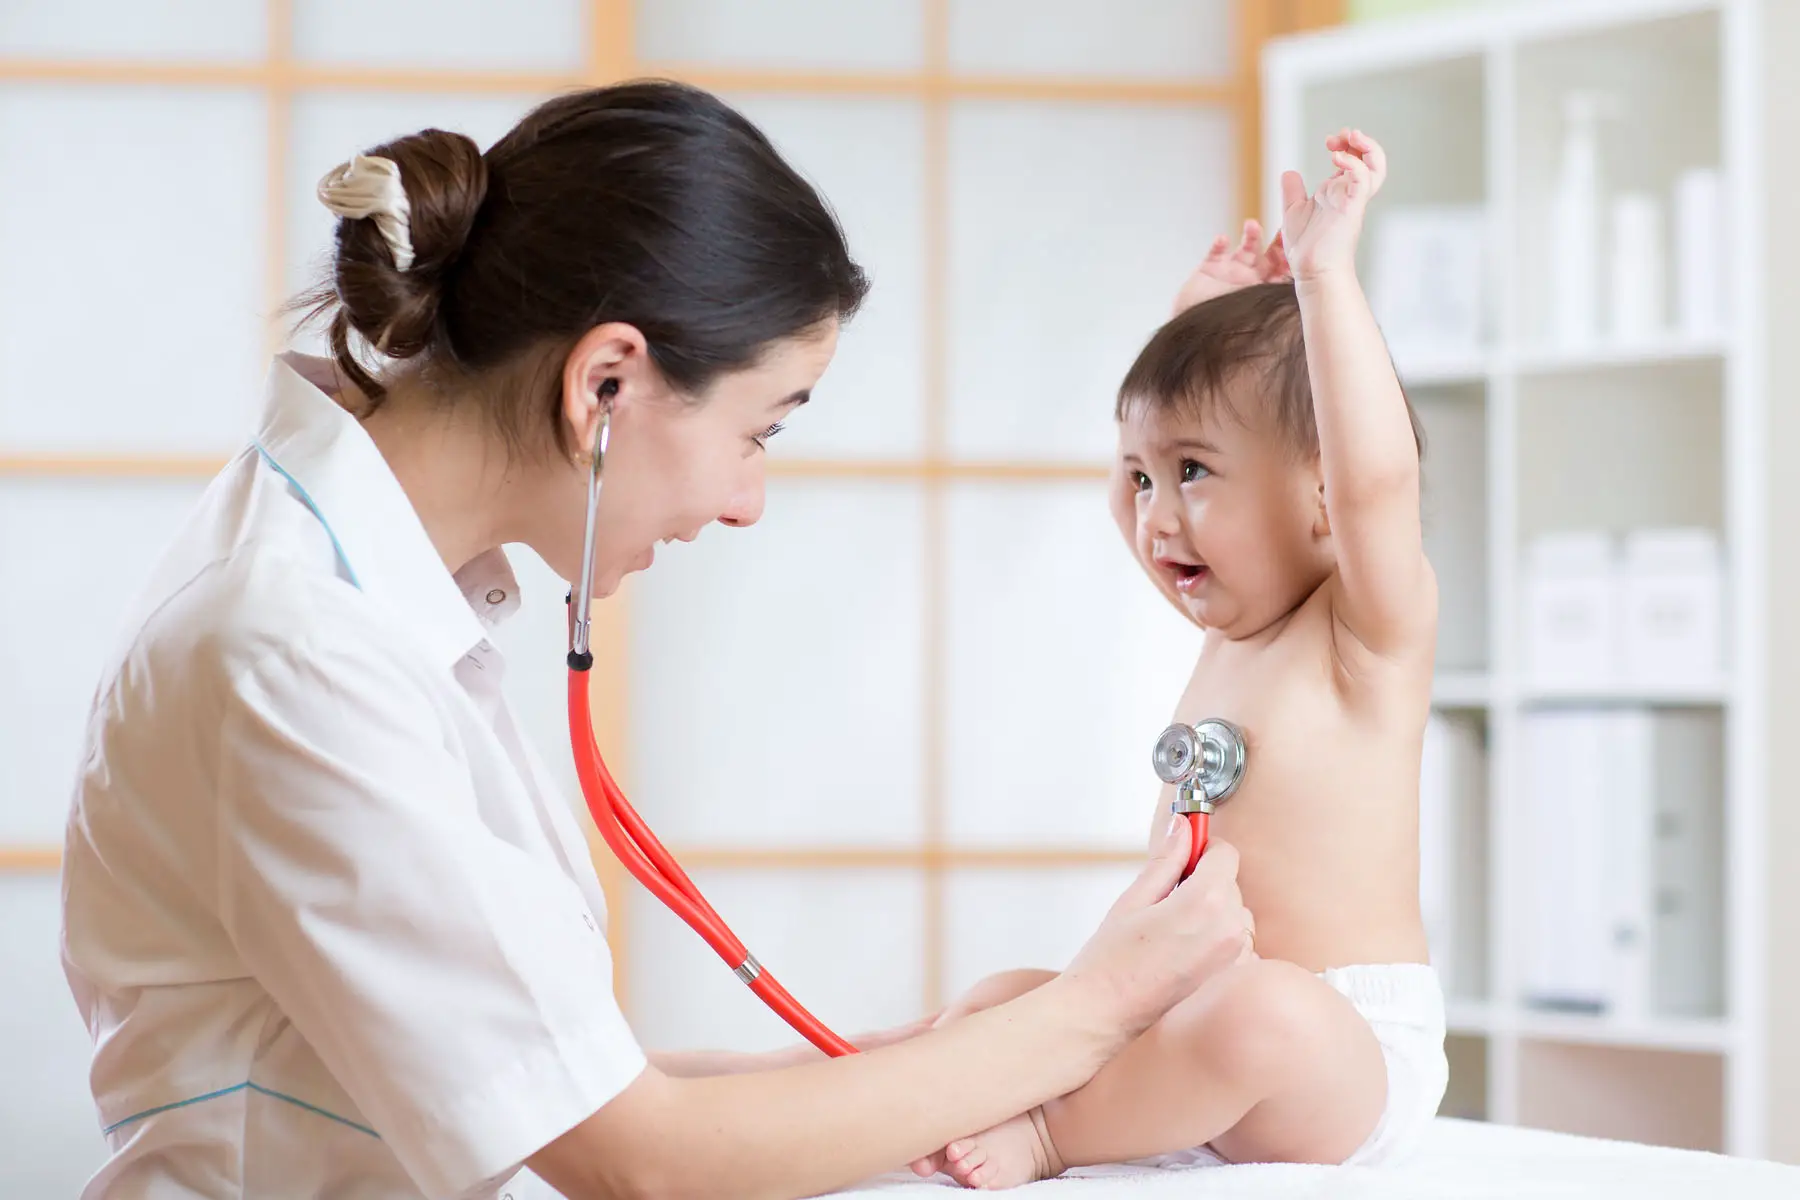 Luxembourg children's healthcare: a pediatrician examines a baby